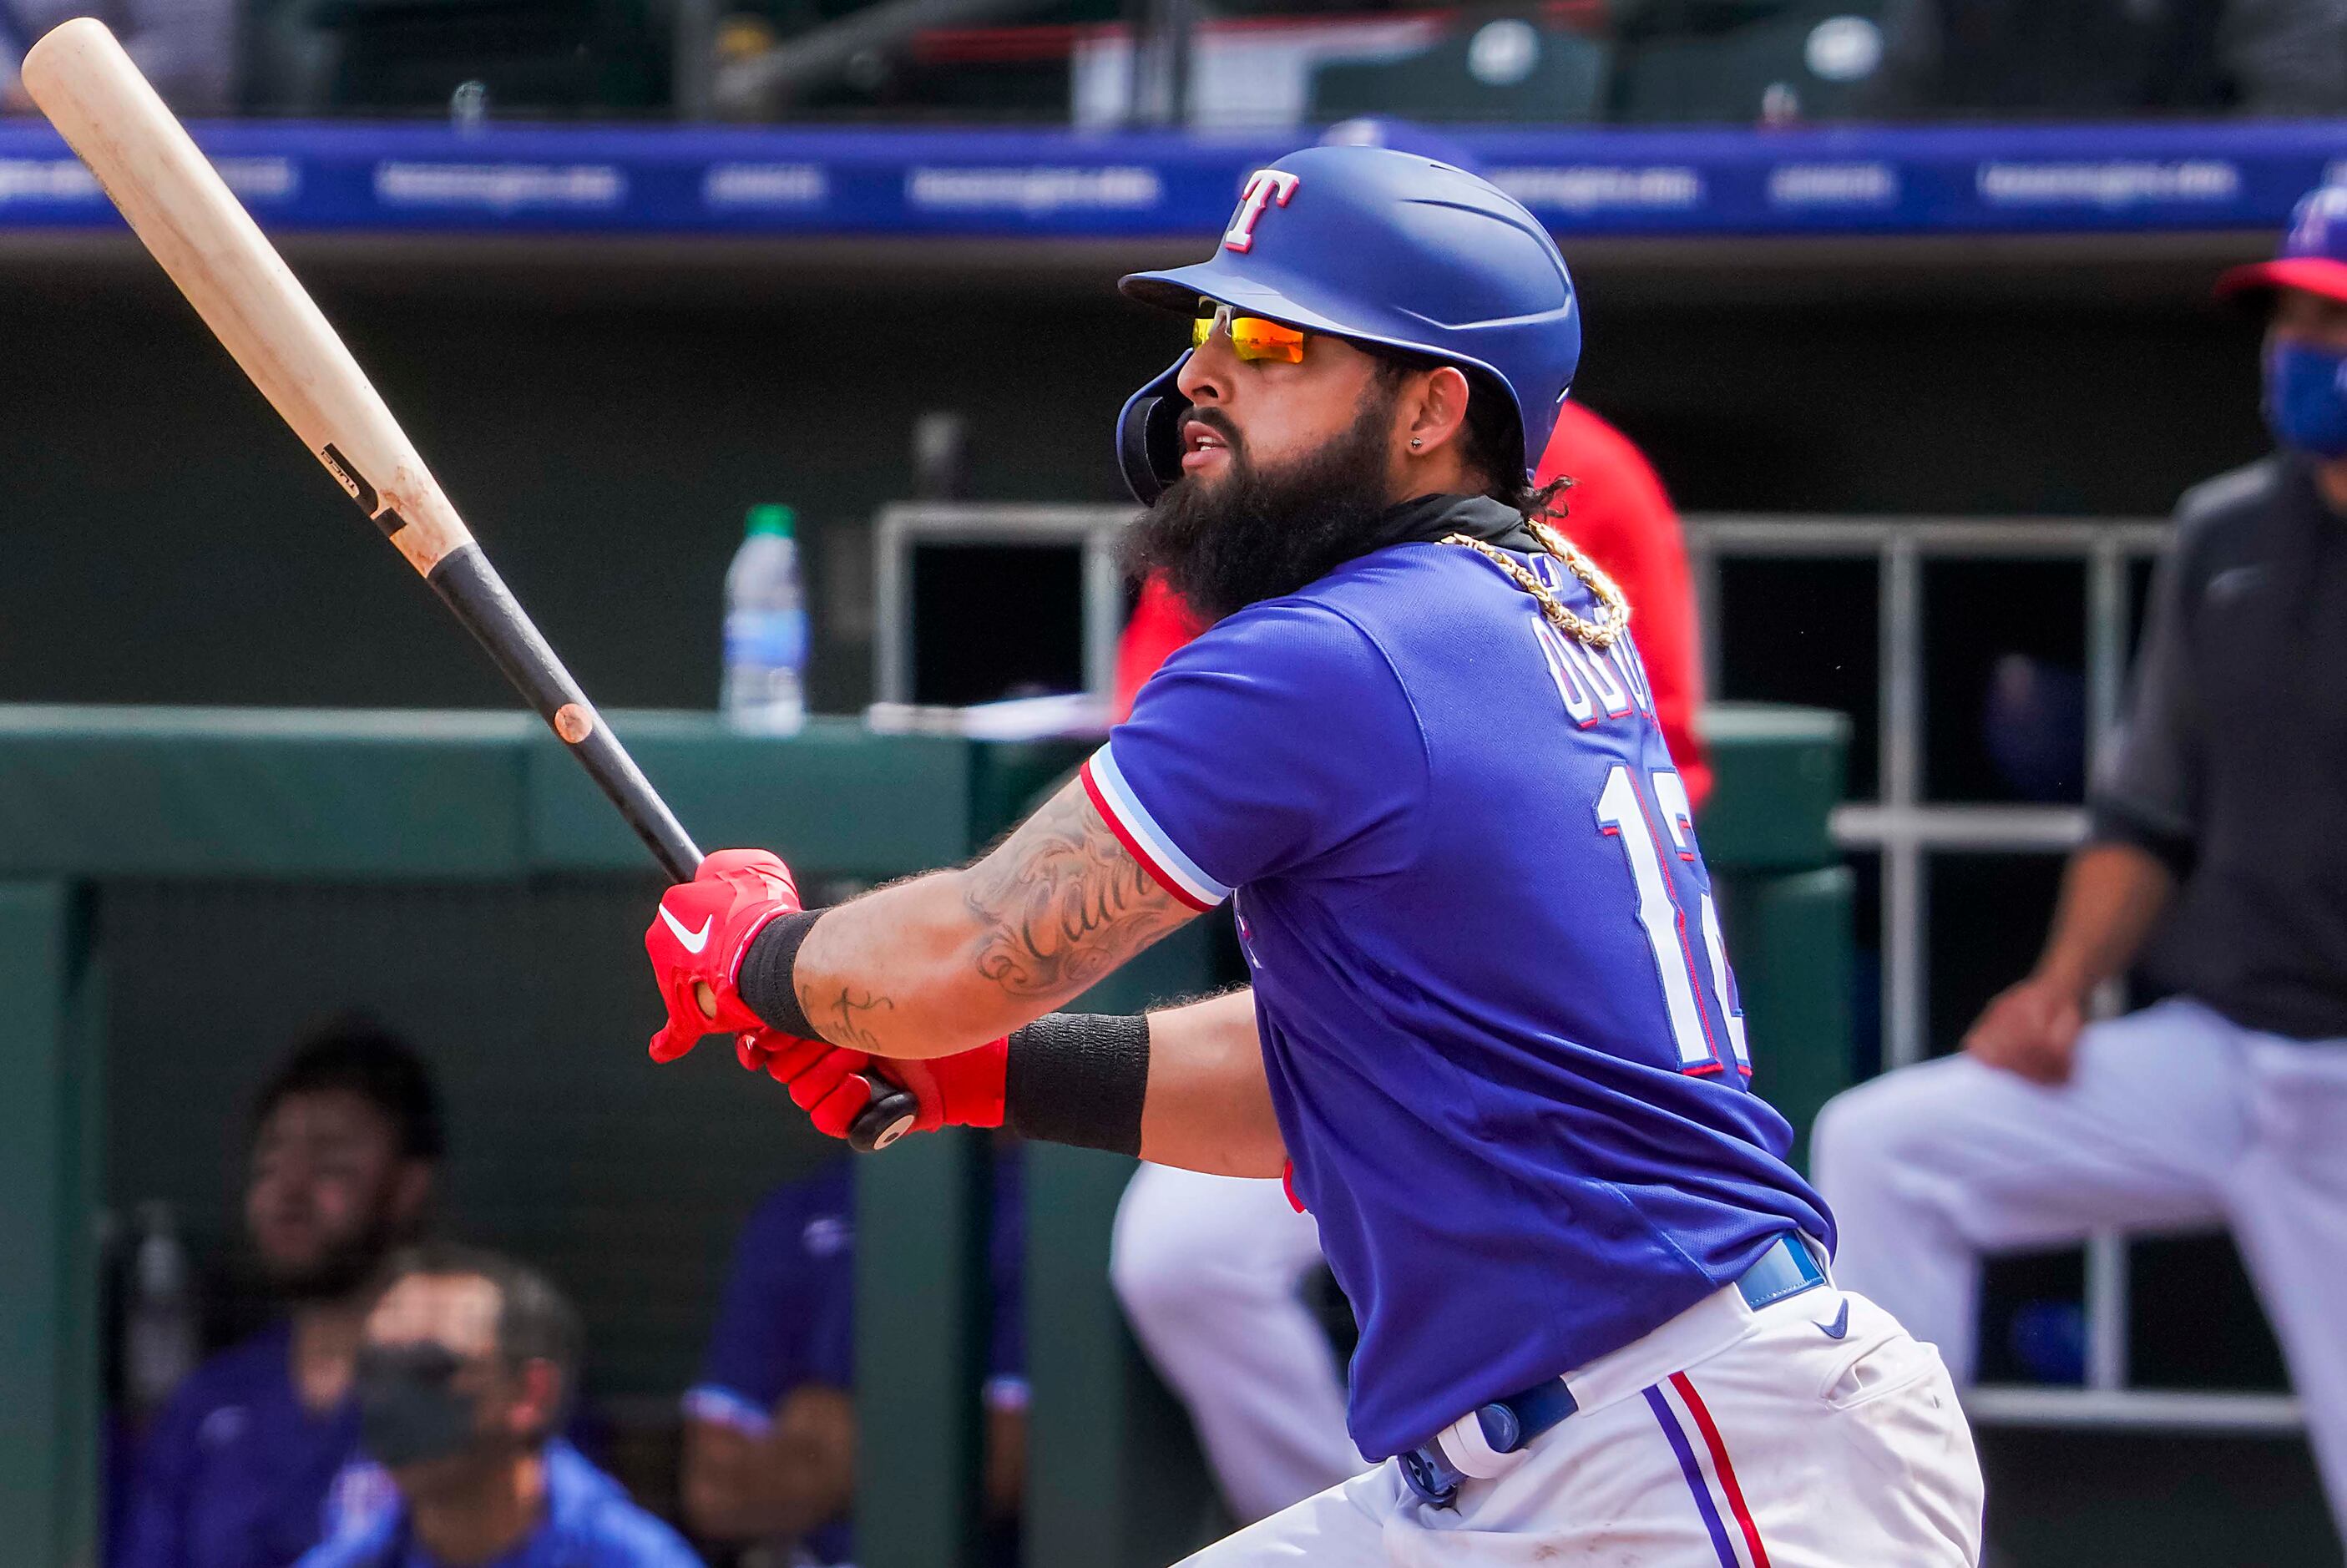 Rougned Odor deserves his Orioles roster spot, but a role change